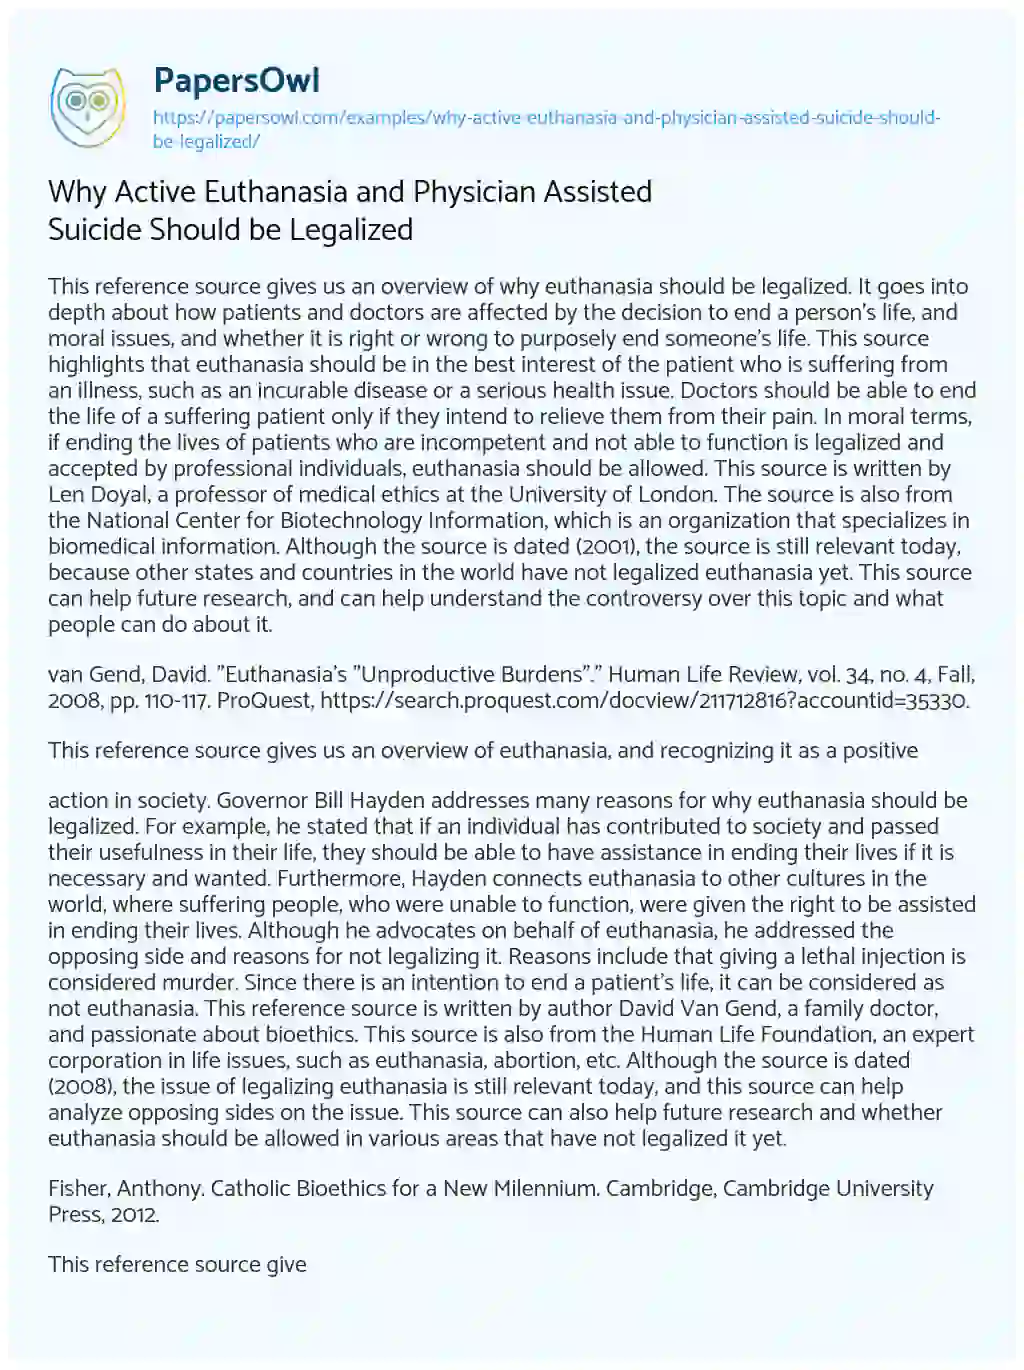 Essay on Why Active Euthanasia and Physician Assisted Suicide should be Legalized